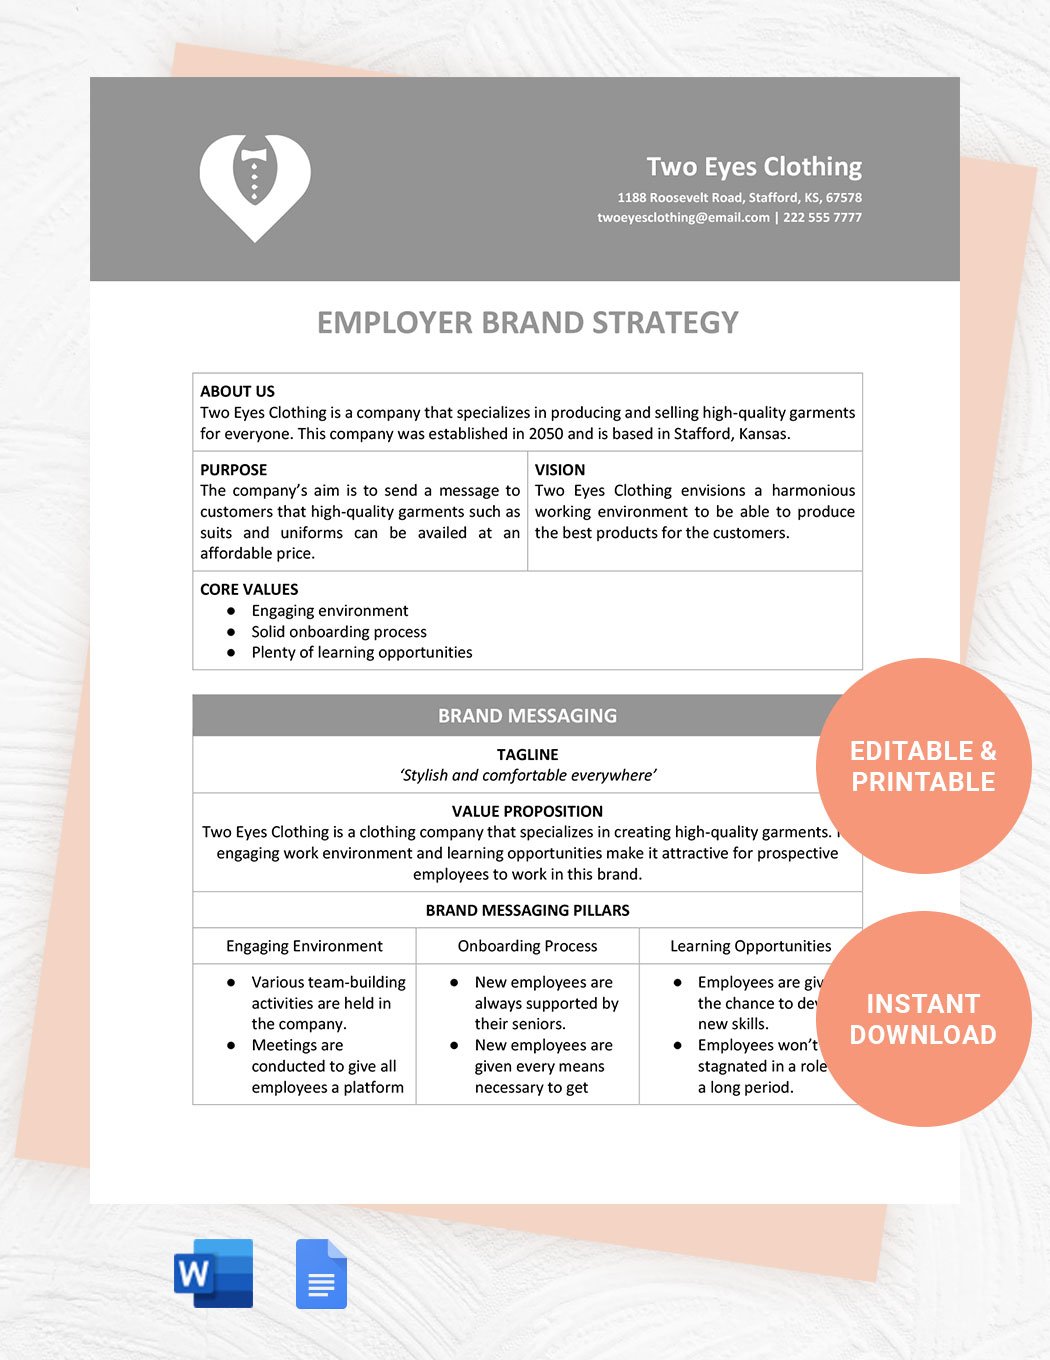 Employer Brand Strategy Template in Word, Google Docs